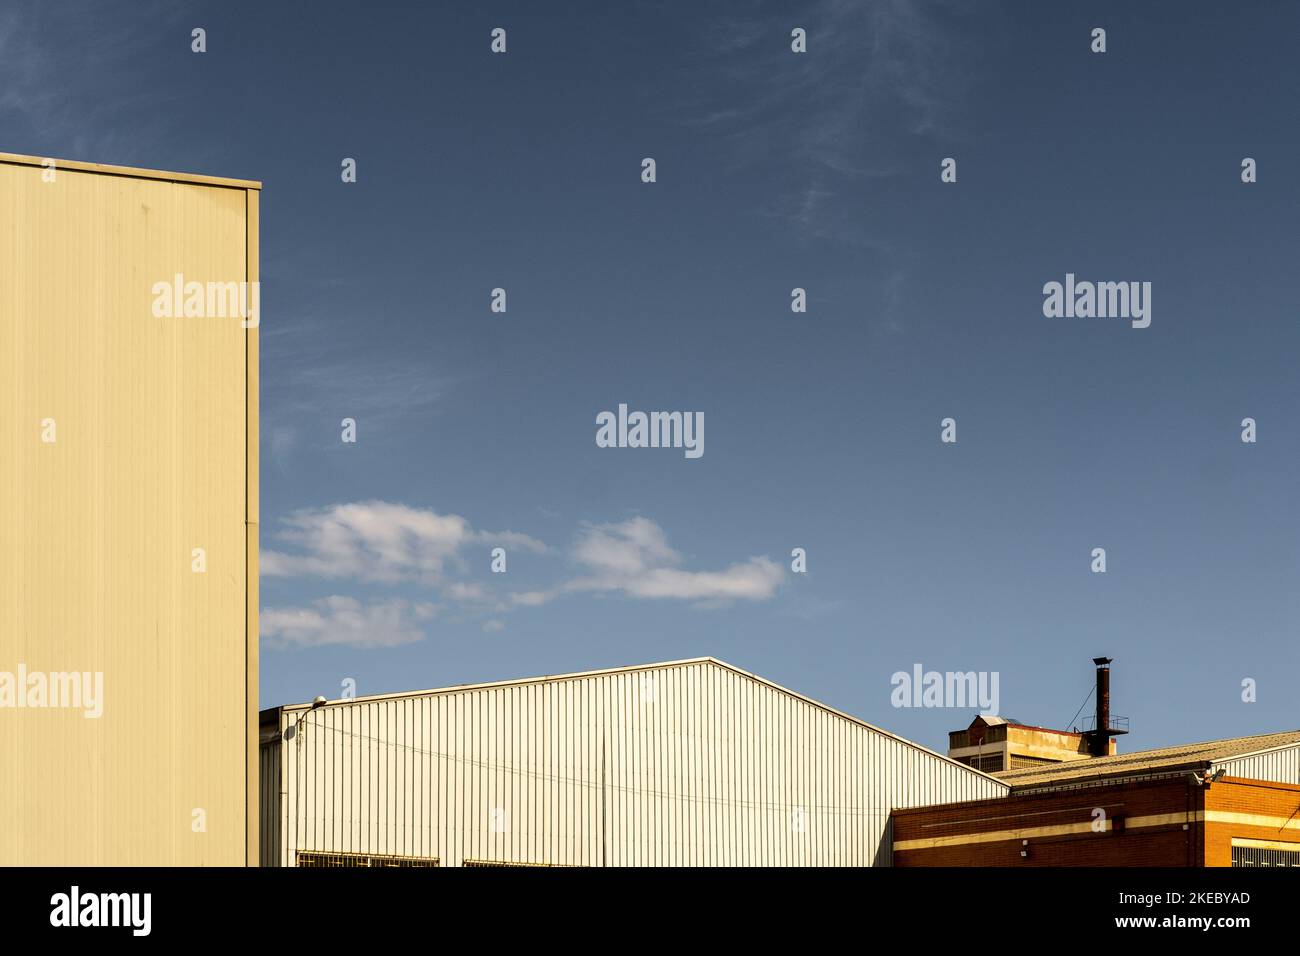 details of a warehouse building in an industrial landscape in a suburb of a European city Stock Photo